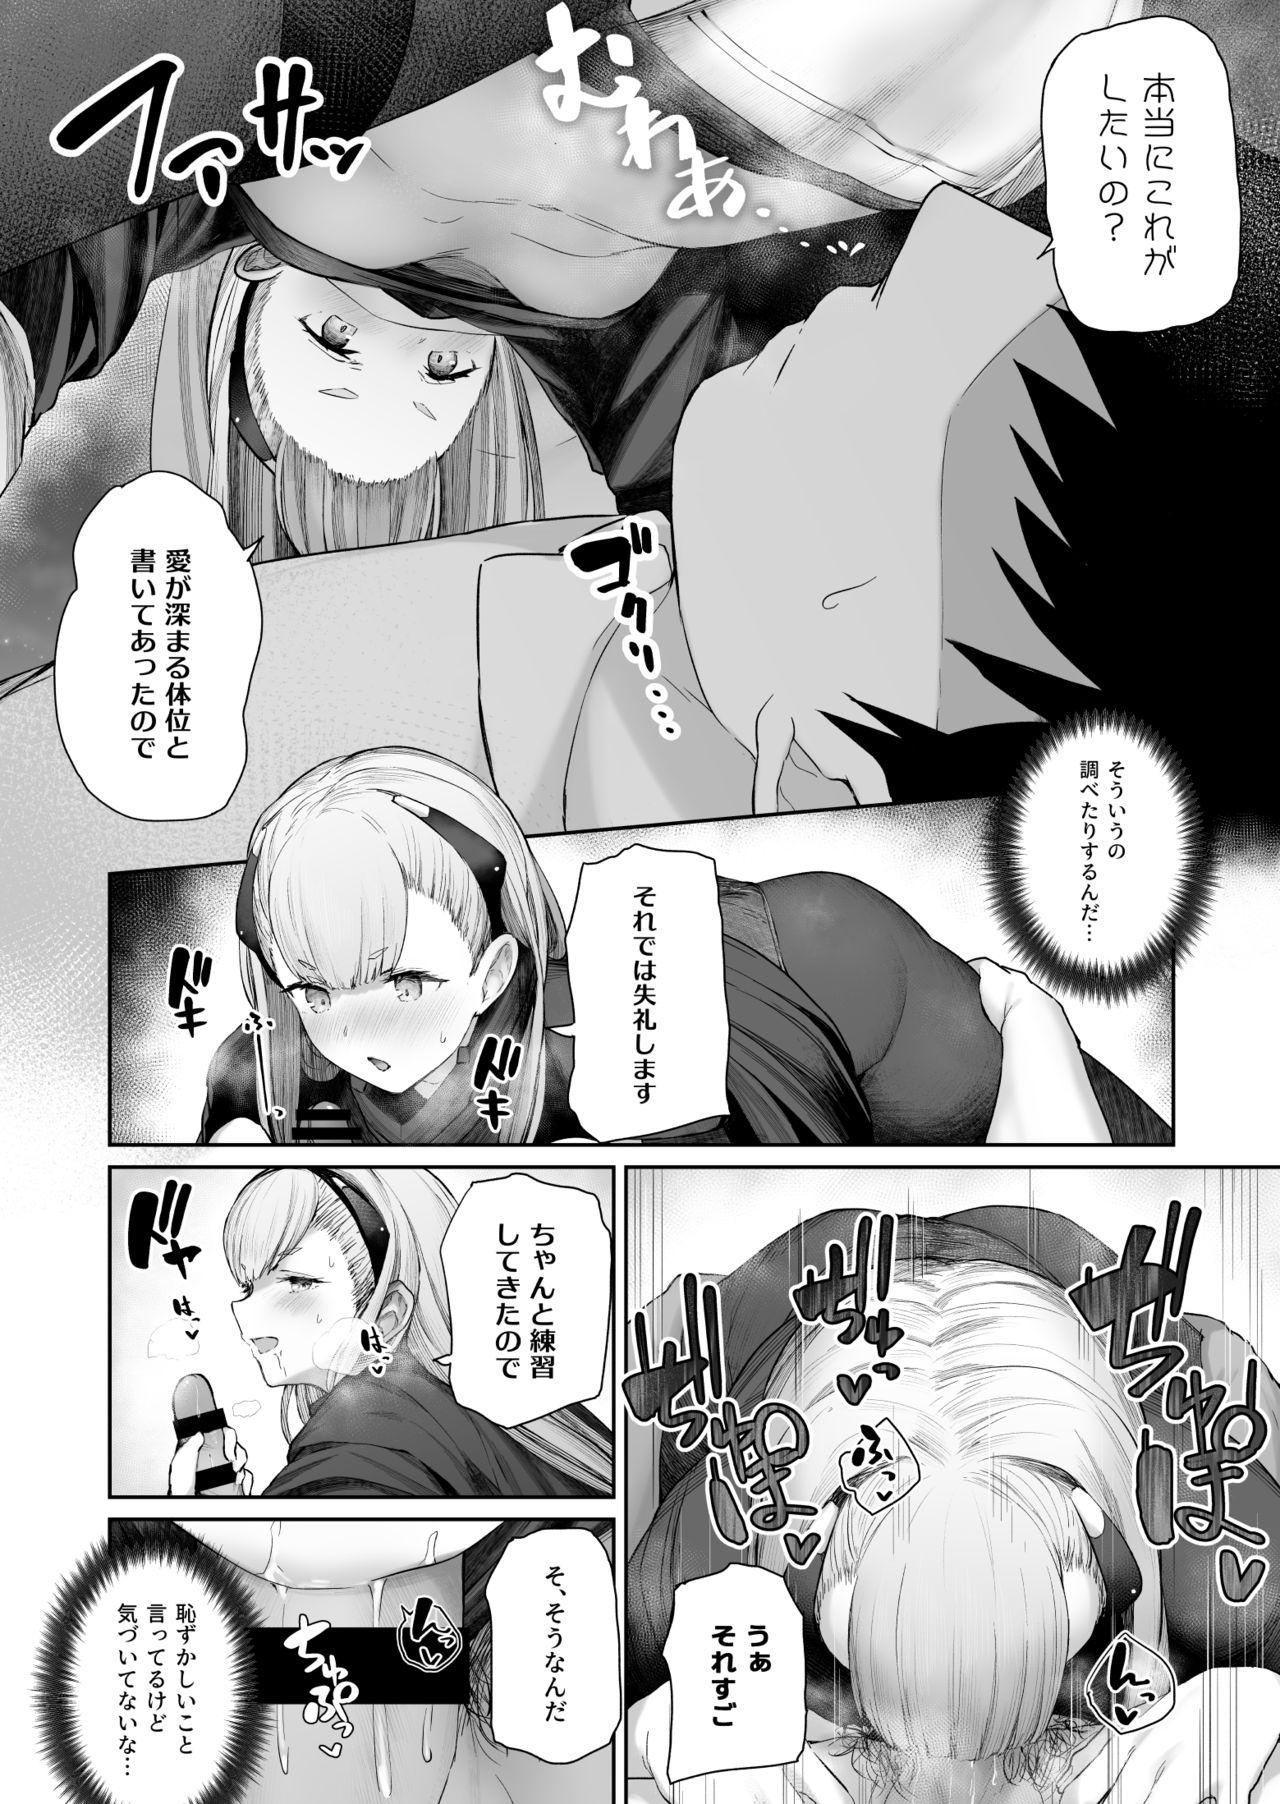 Monster AK-Alfa - Girls frontline Ass To Mouth - Page 6